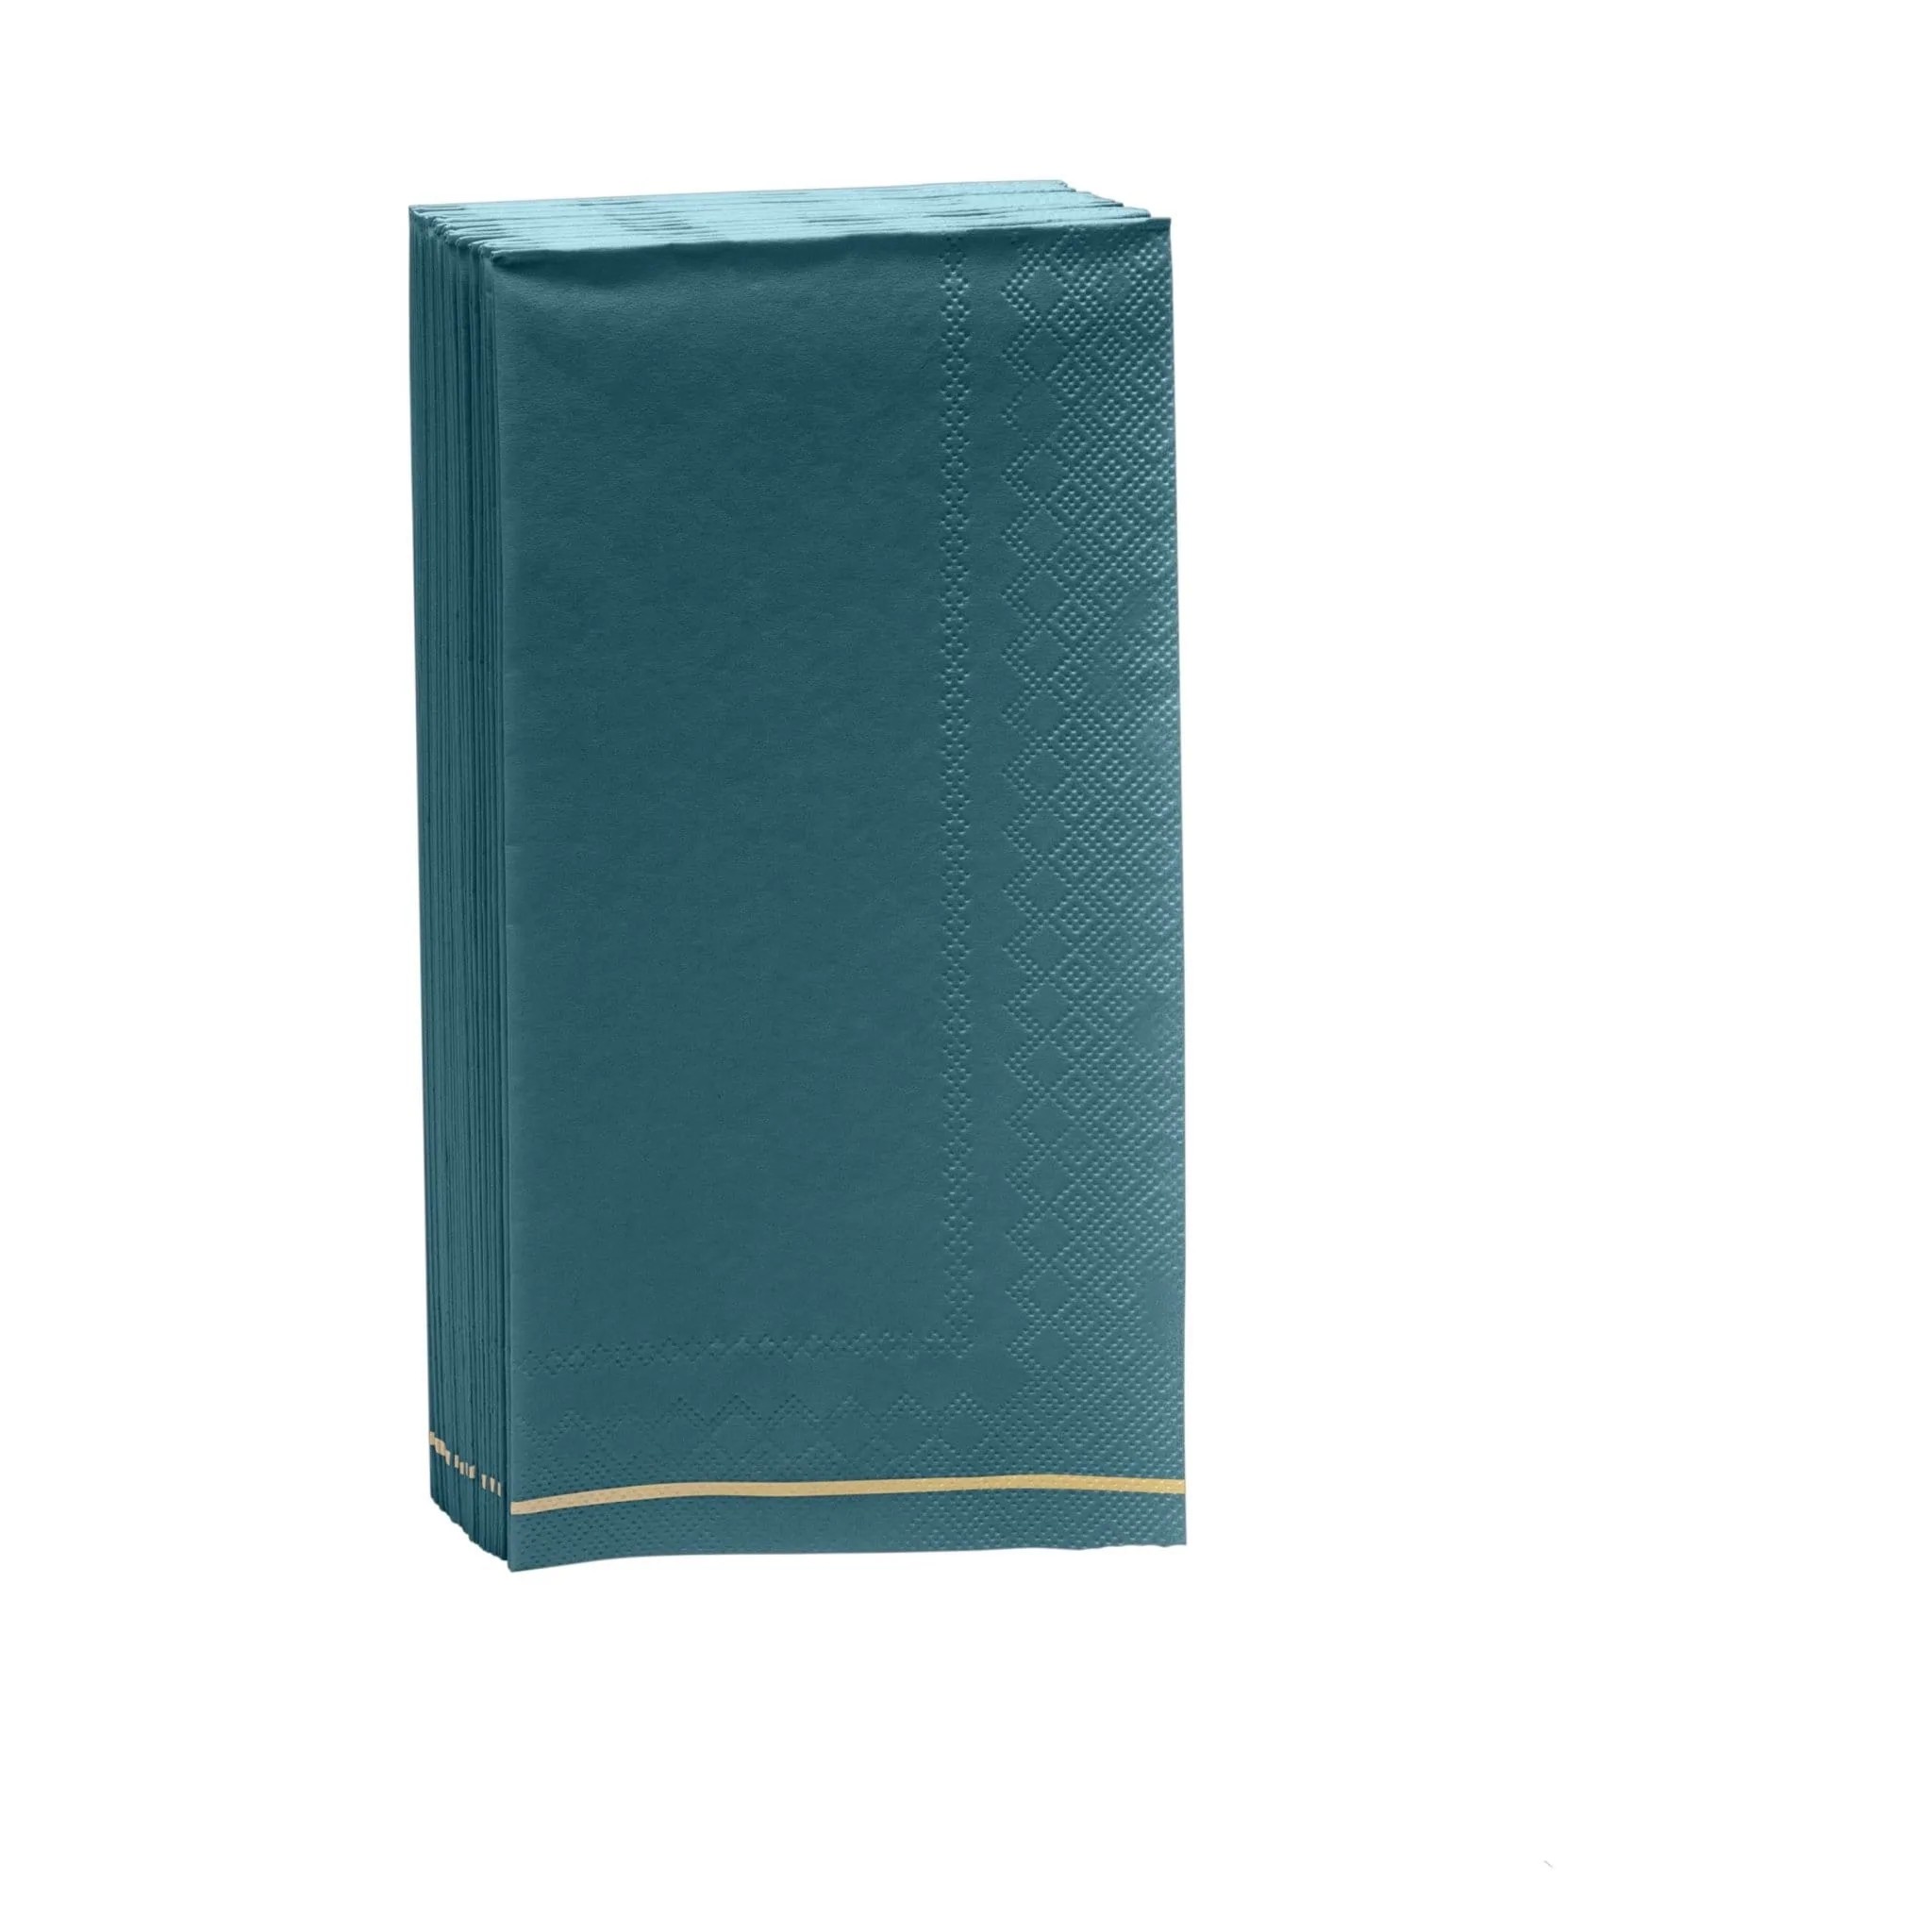 Luxe Party Teal with Gold Stripe Dinner Napkins - 16 pcs